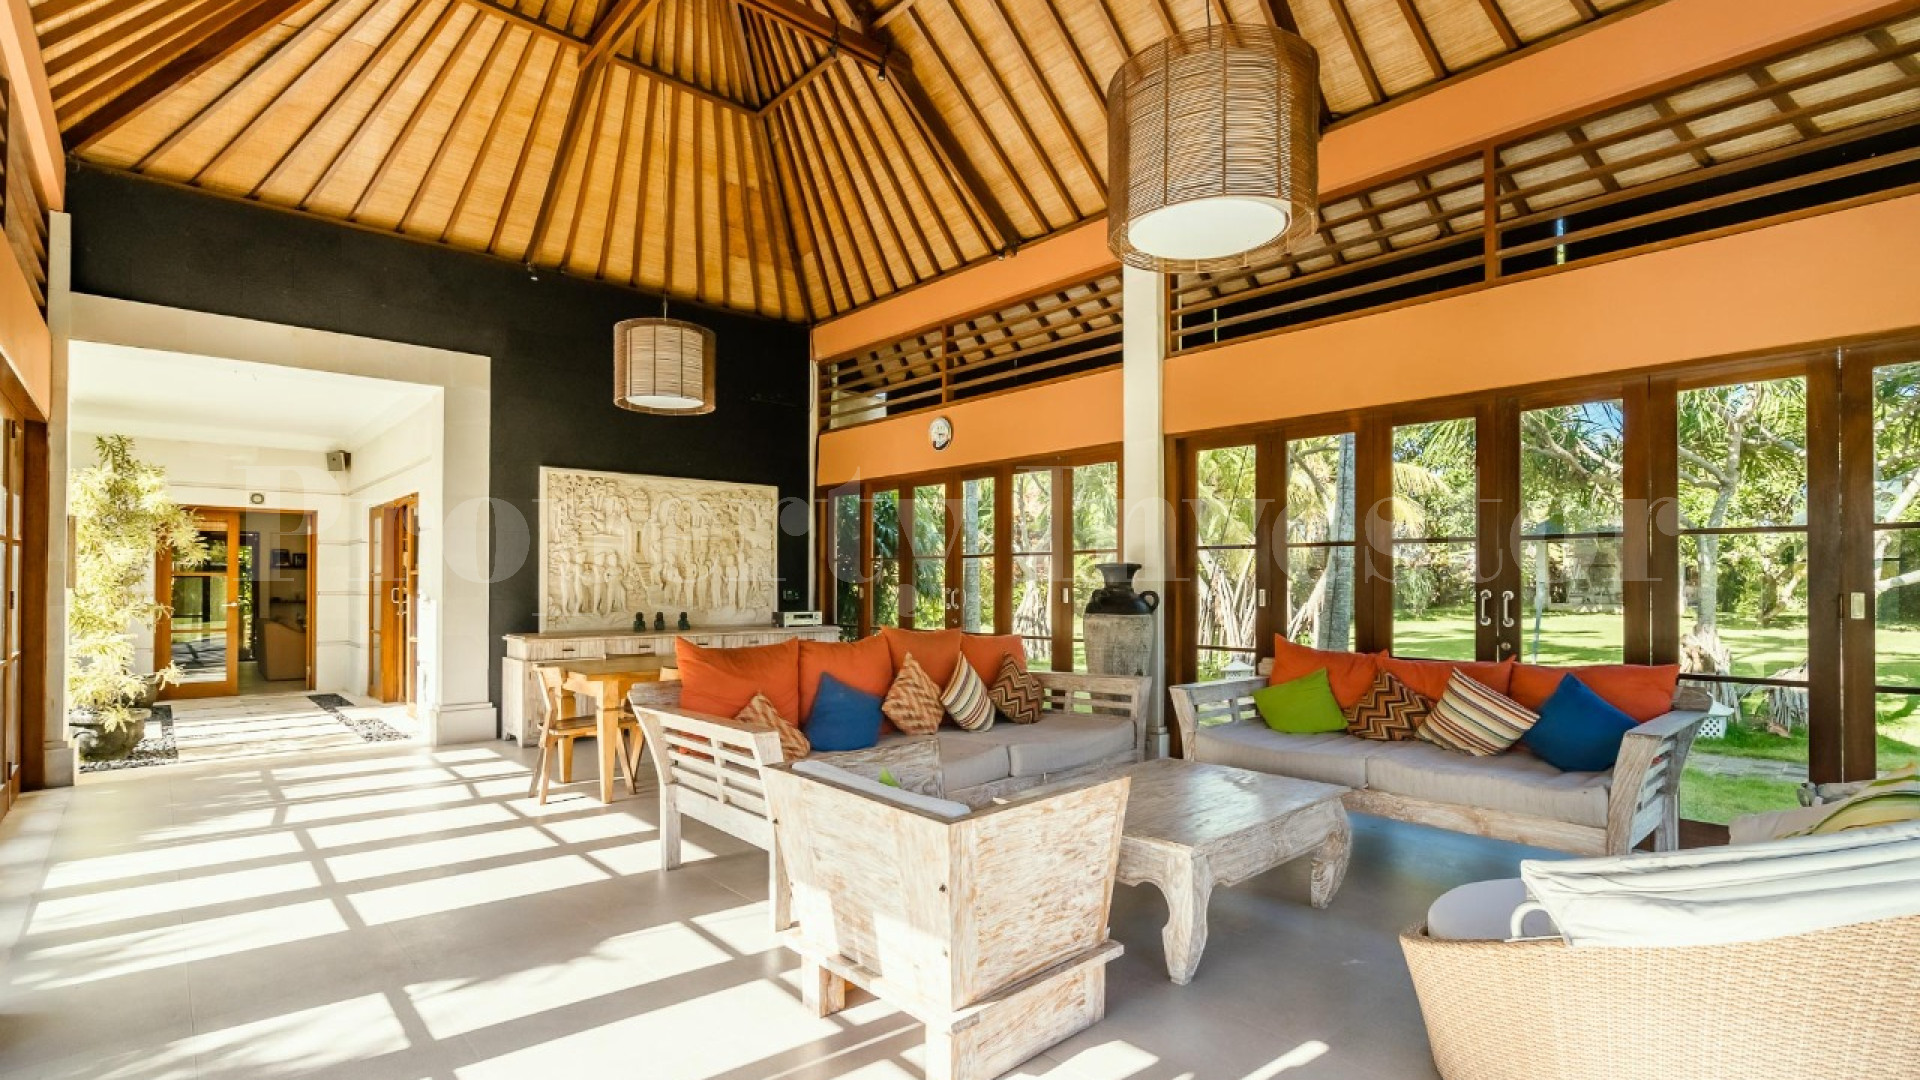 Spacious 6 Bedroom Modern Villa with Lush Gardens & Amazing Sunset Views for Sale in Pererenan, Bali